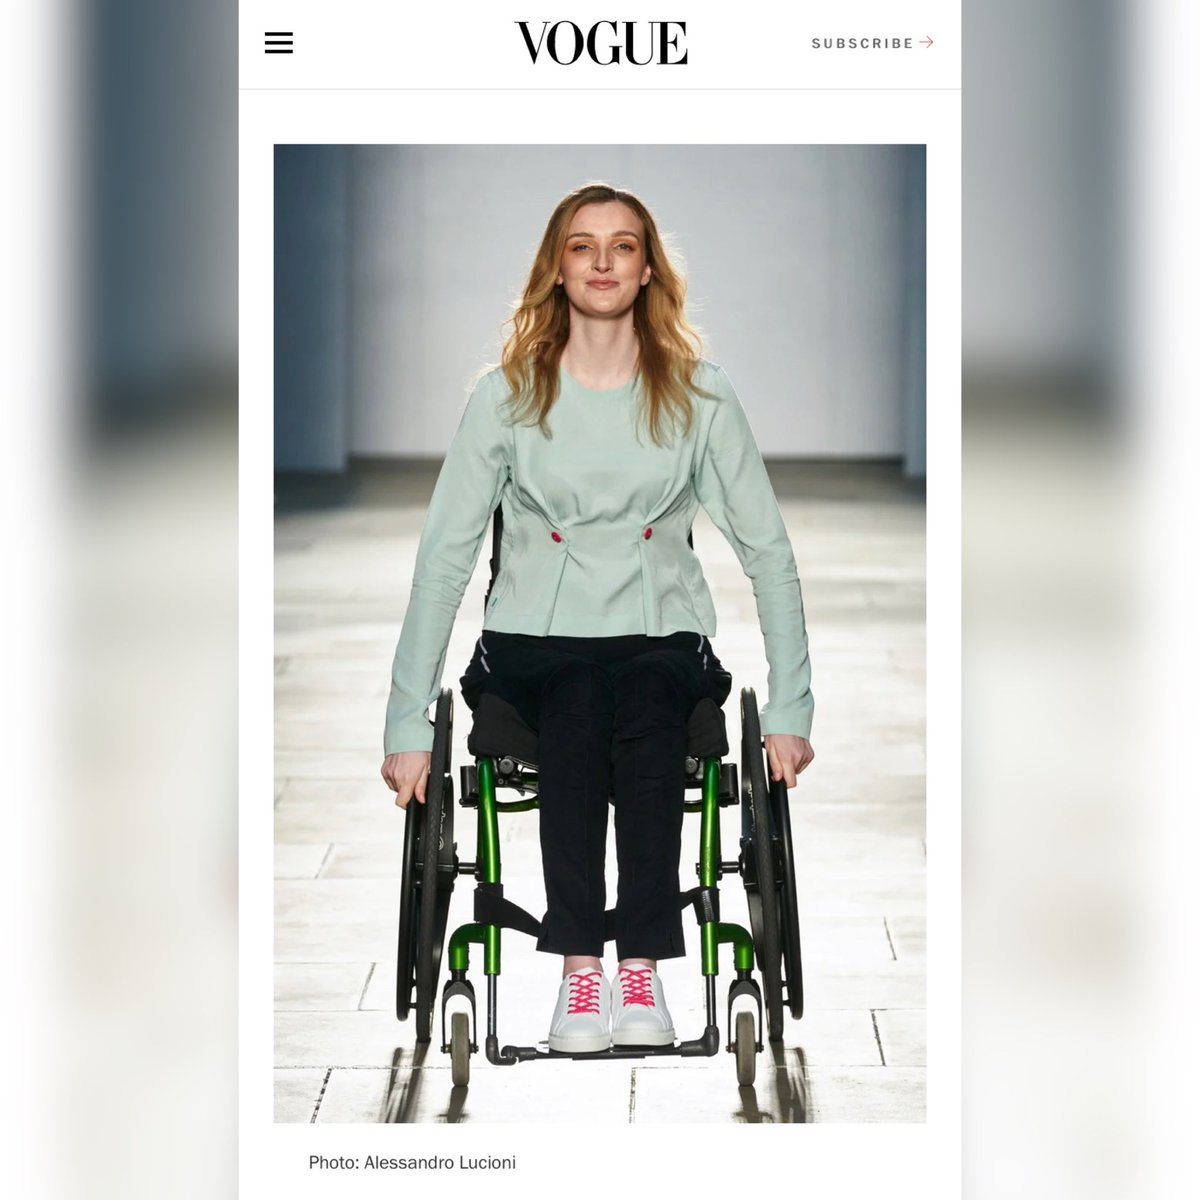 13 years ago I became unwell & never fully recovered. Today, I made it in @voguemagazine To the ‘friends’ who made fun of my disability, to the school who wouldn’t make adaptations, to the (god knows how) many times I’ve been turned down from things I’m doing alright on my own